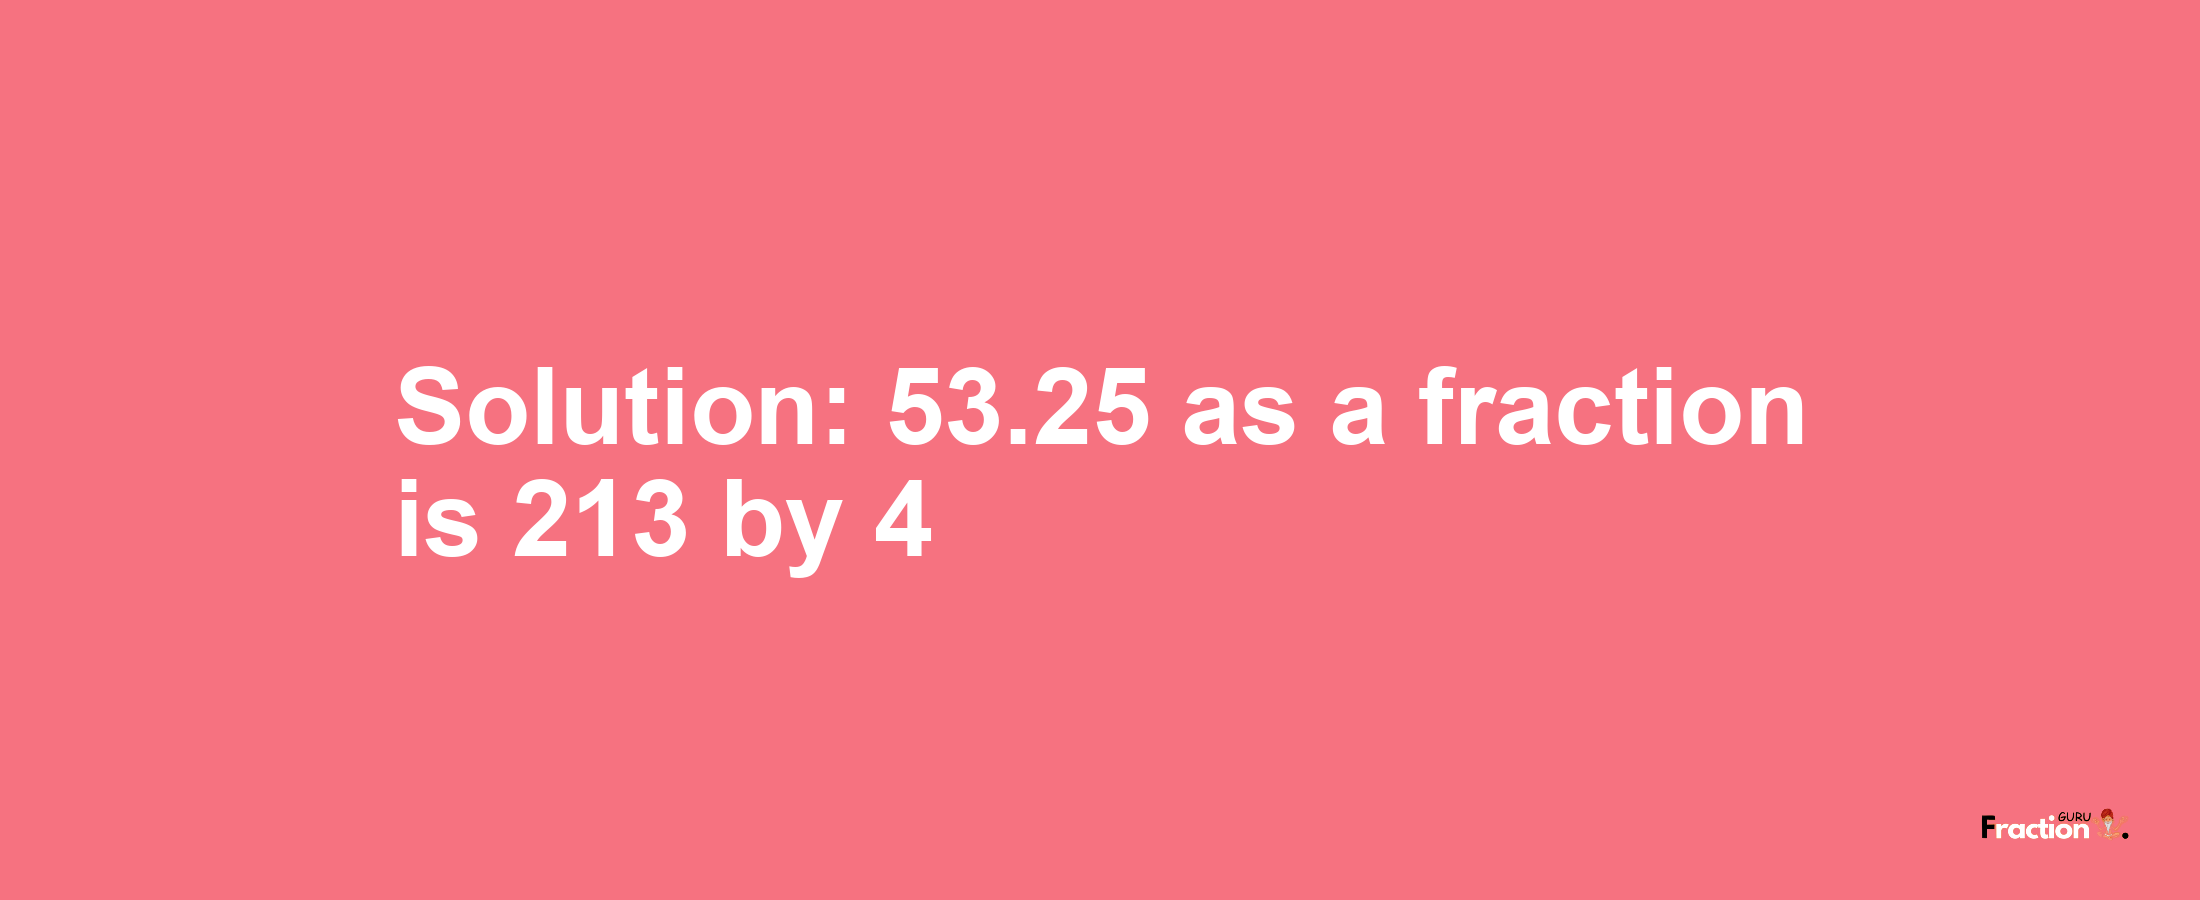 Solution:53.25 as a fraction is 213/4